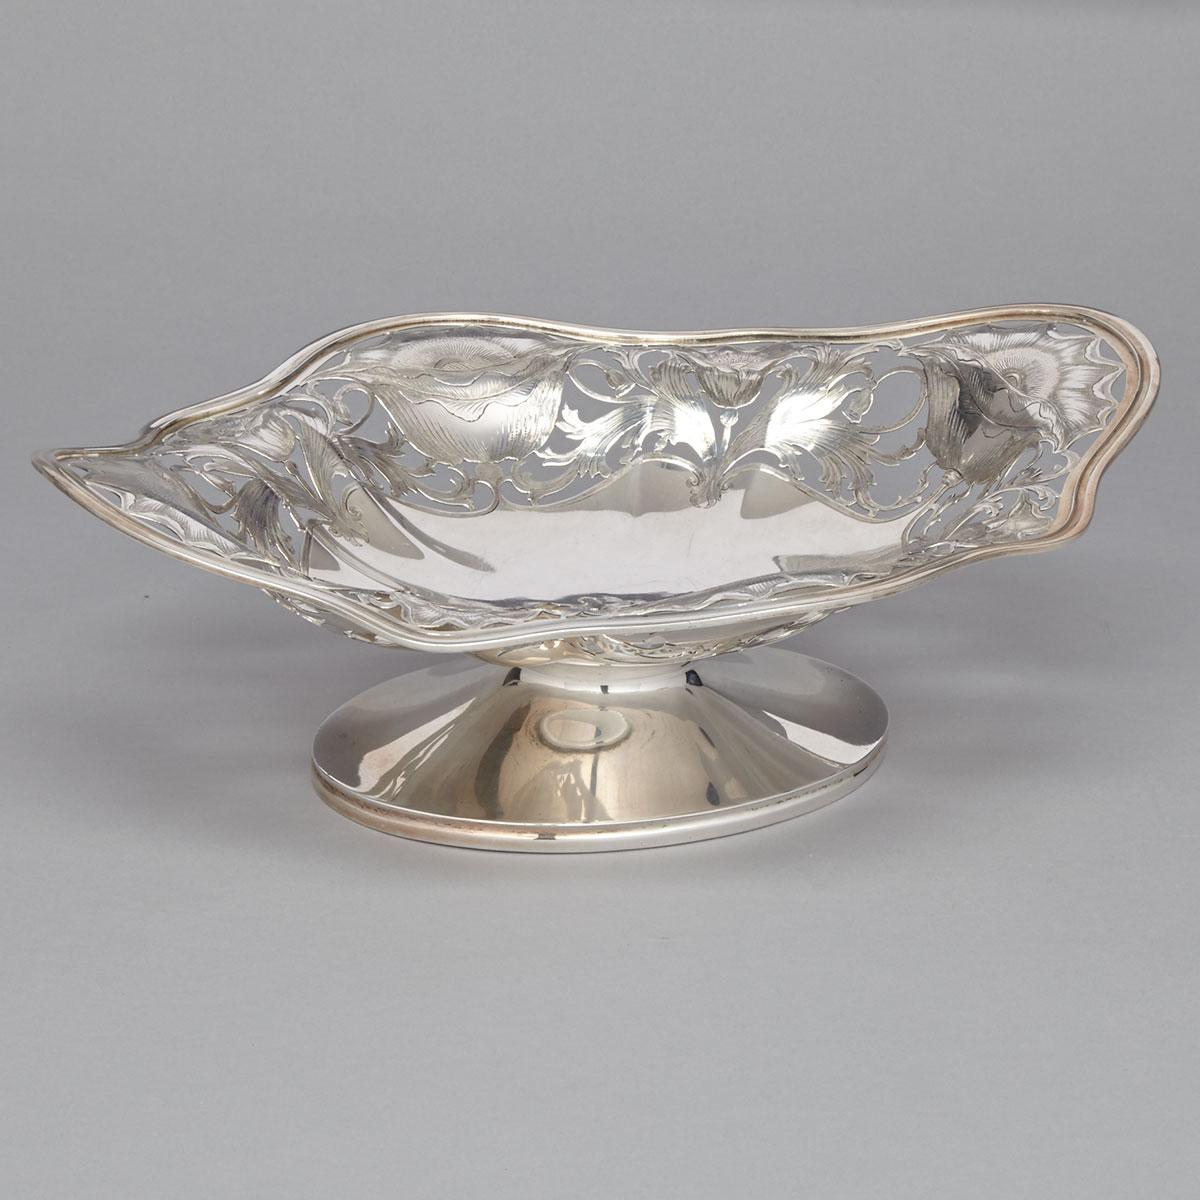 American Silver Oval Footed Comport, Gorham Mfg. Co., Providence, R.I., 1900